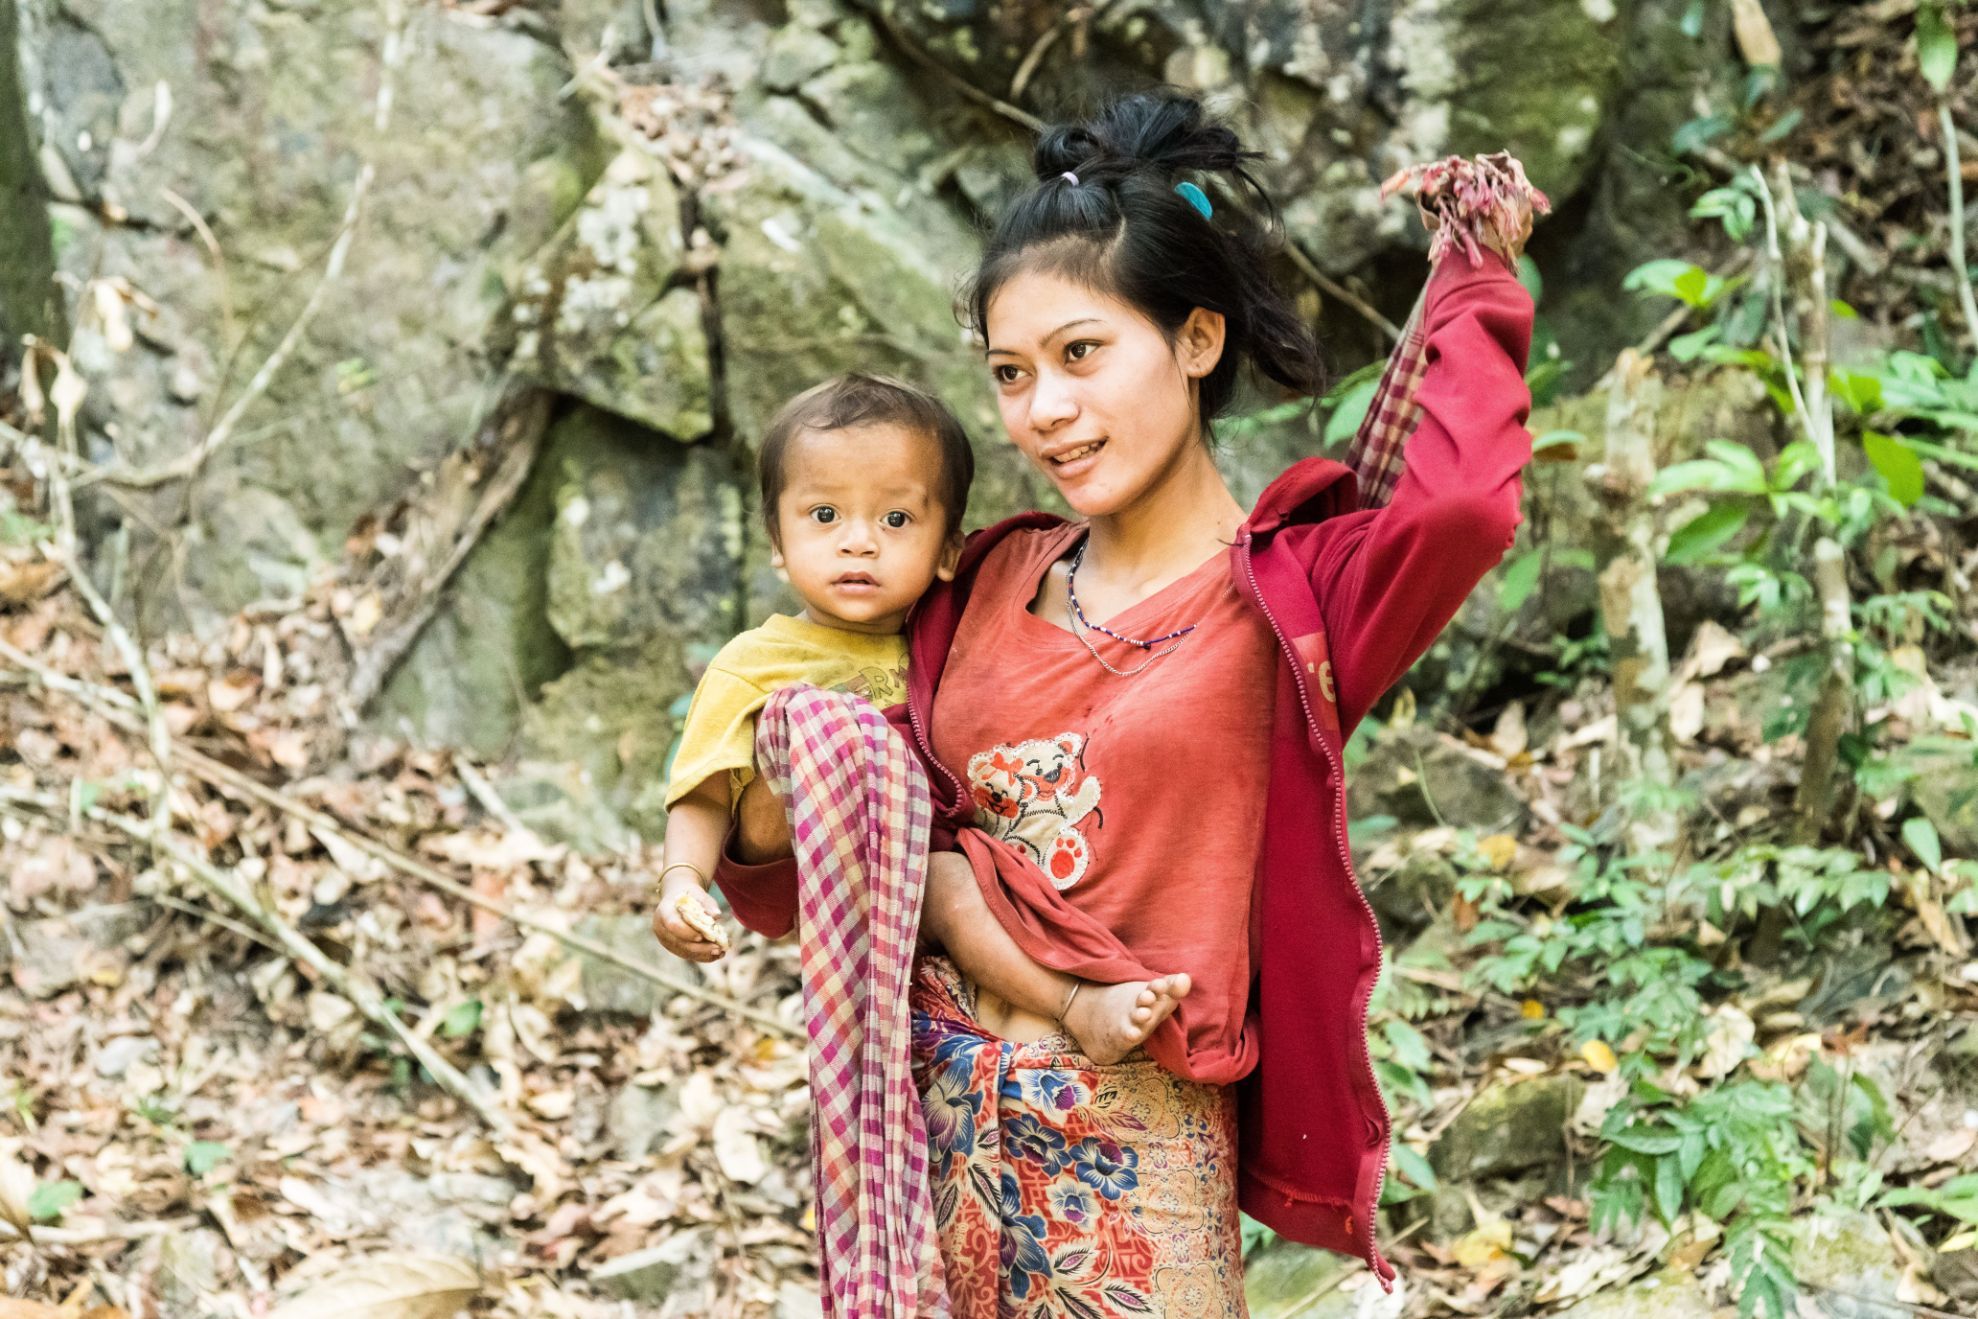 Homestay projects can connect local producers of handicrafts, cuisine or services with customers, and they can empower women in rural communities. Photo: Easia Travel